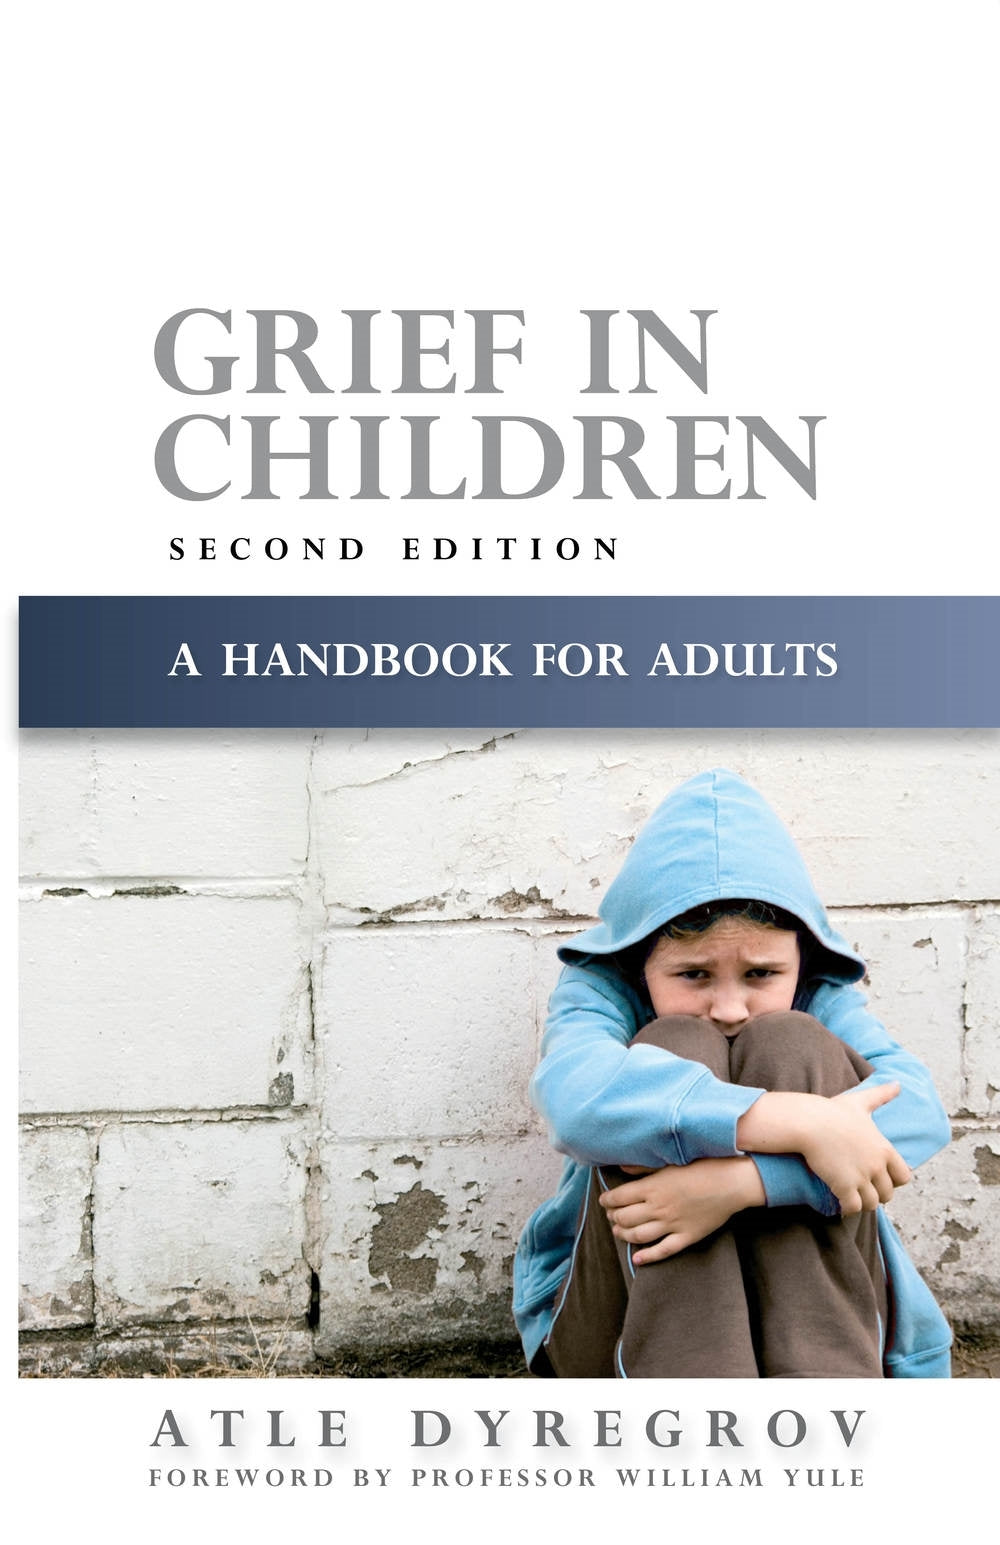 Grief in Children by Atle Dyregrov, William Yule, No Author Listed